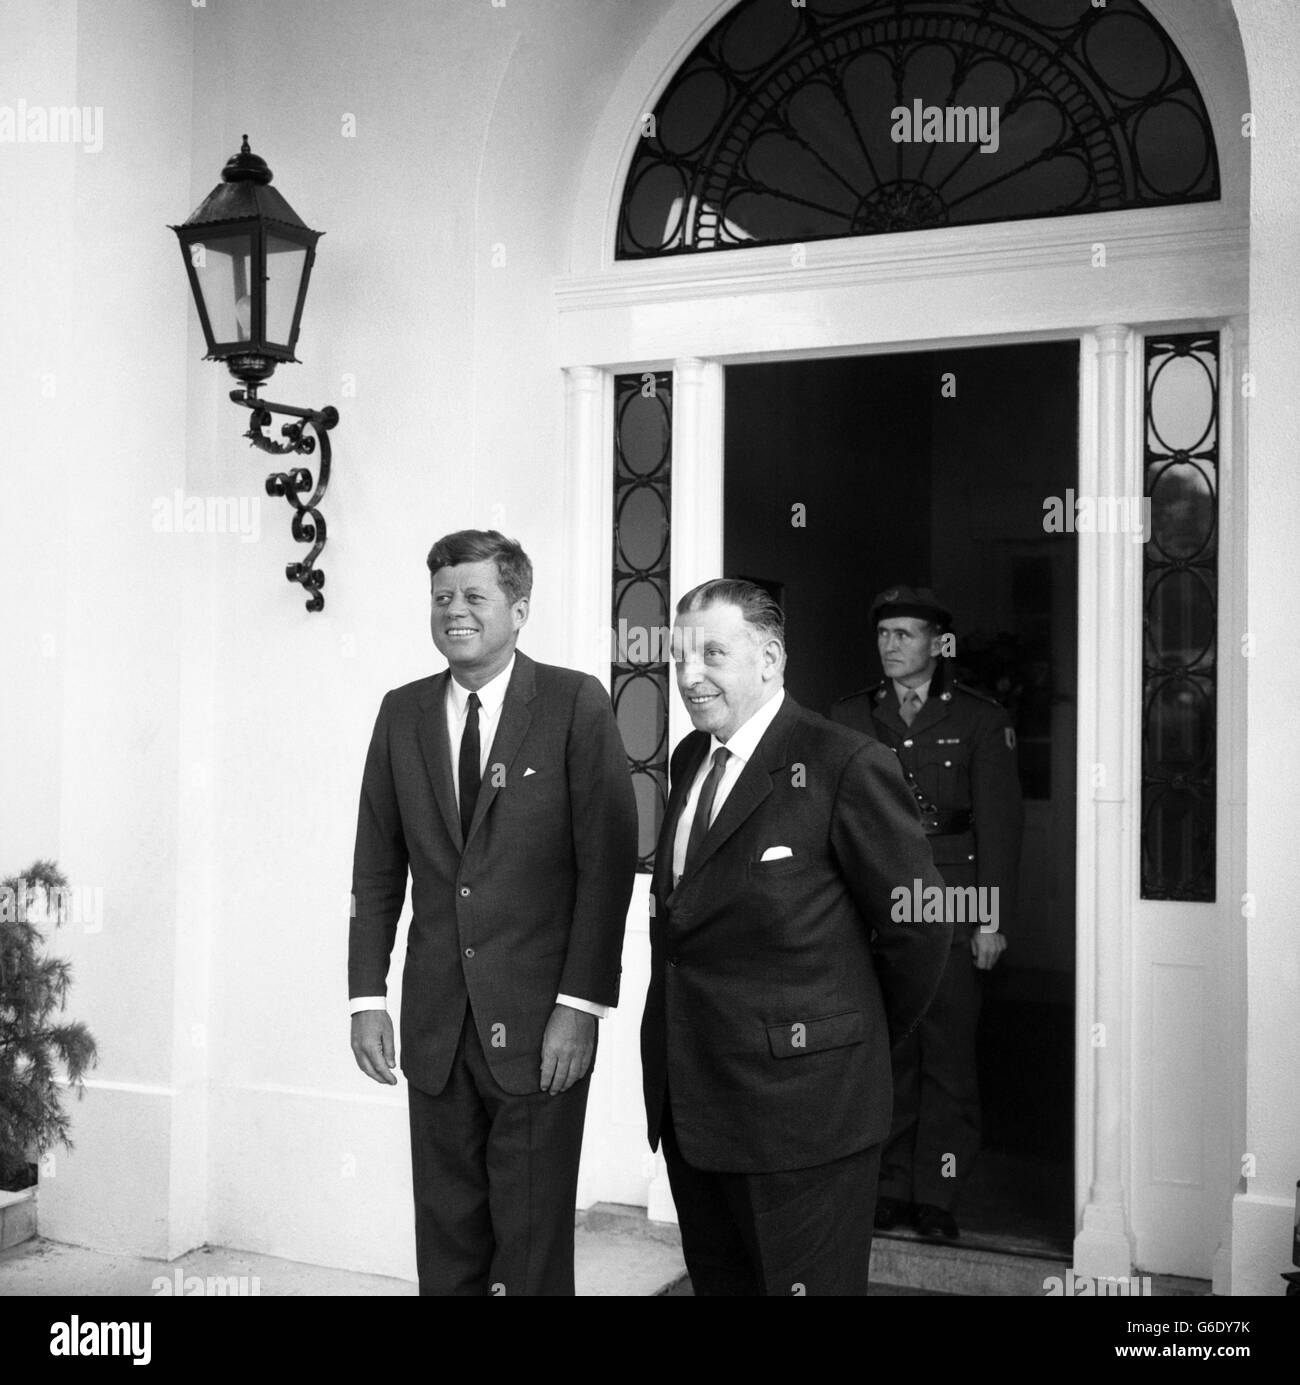 PRESIDENT JOHN F. KENNEDY of America with MR. SEAN LEMASS, Irish Prime Minister, at the American Embassy in Dublin during the President's three-day visit to Ireland. Earlier in the day, Mr. Kennedy had visited Dunganstown, Co. Wexford, where his great-grandfather lived before emigrating to America in 1850. June 28th 1963 PAR 103890-17 (PNR/P-G) Stock Photo